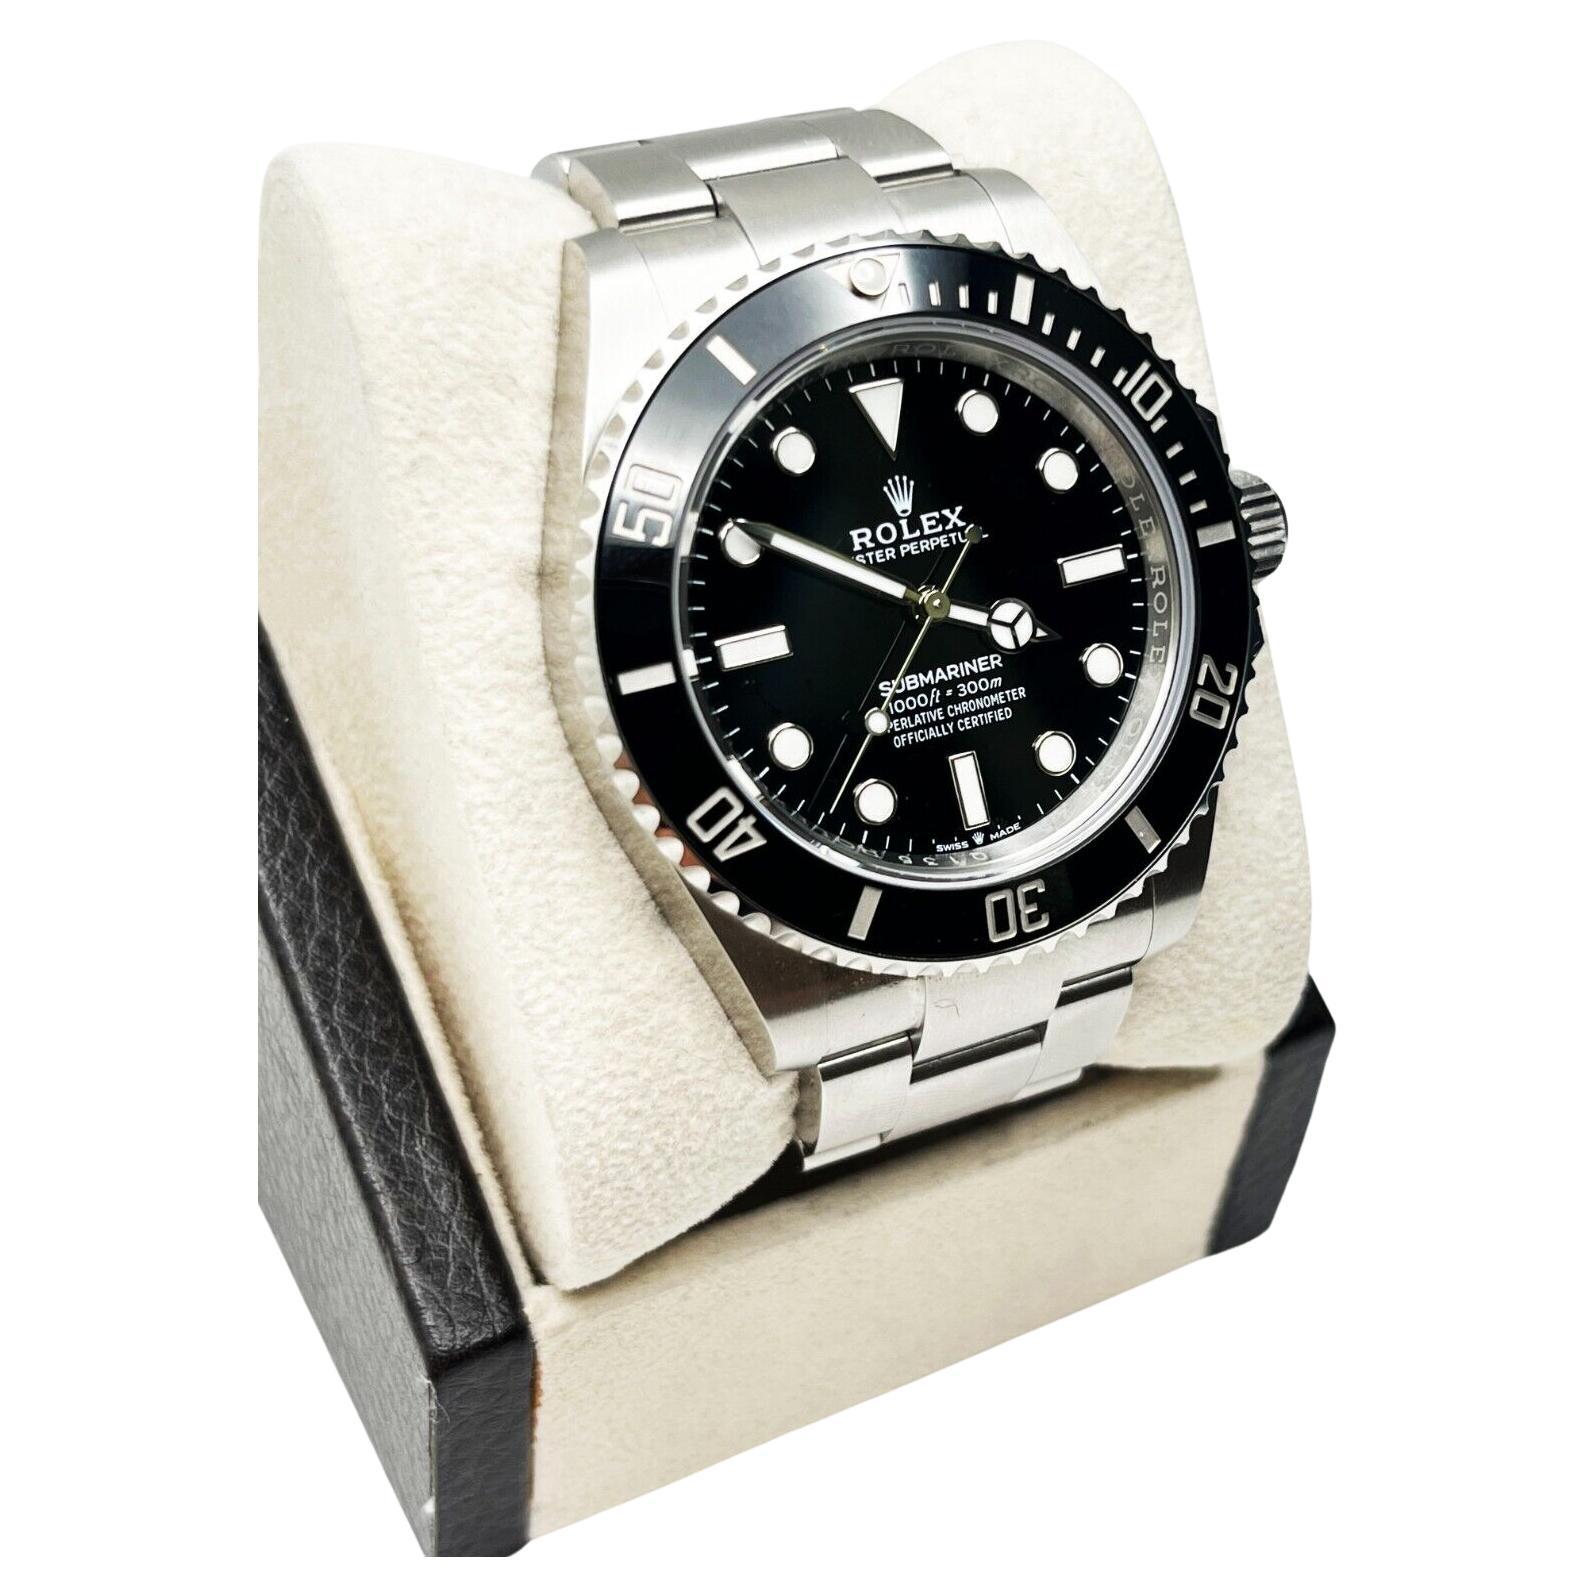 2023 Rolex Submariner 124060 Ceramic 41mm Stainless Steel Box Paper For Sale